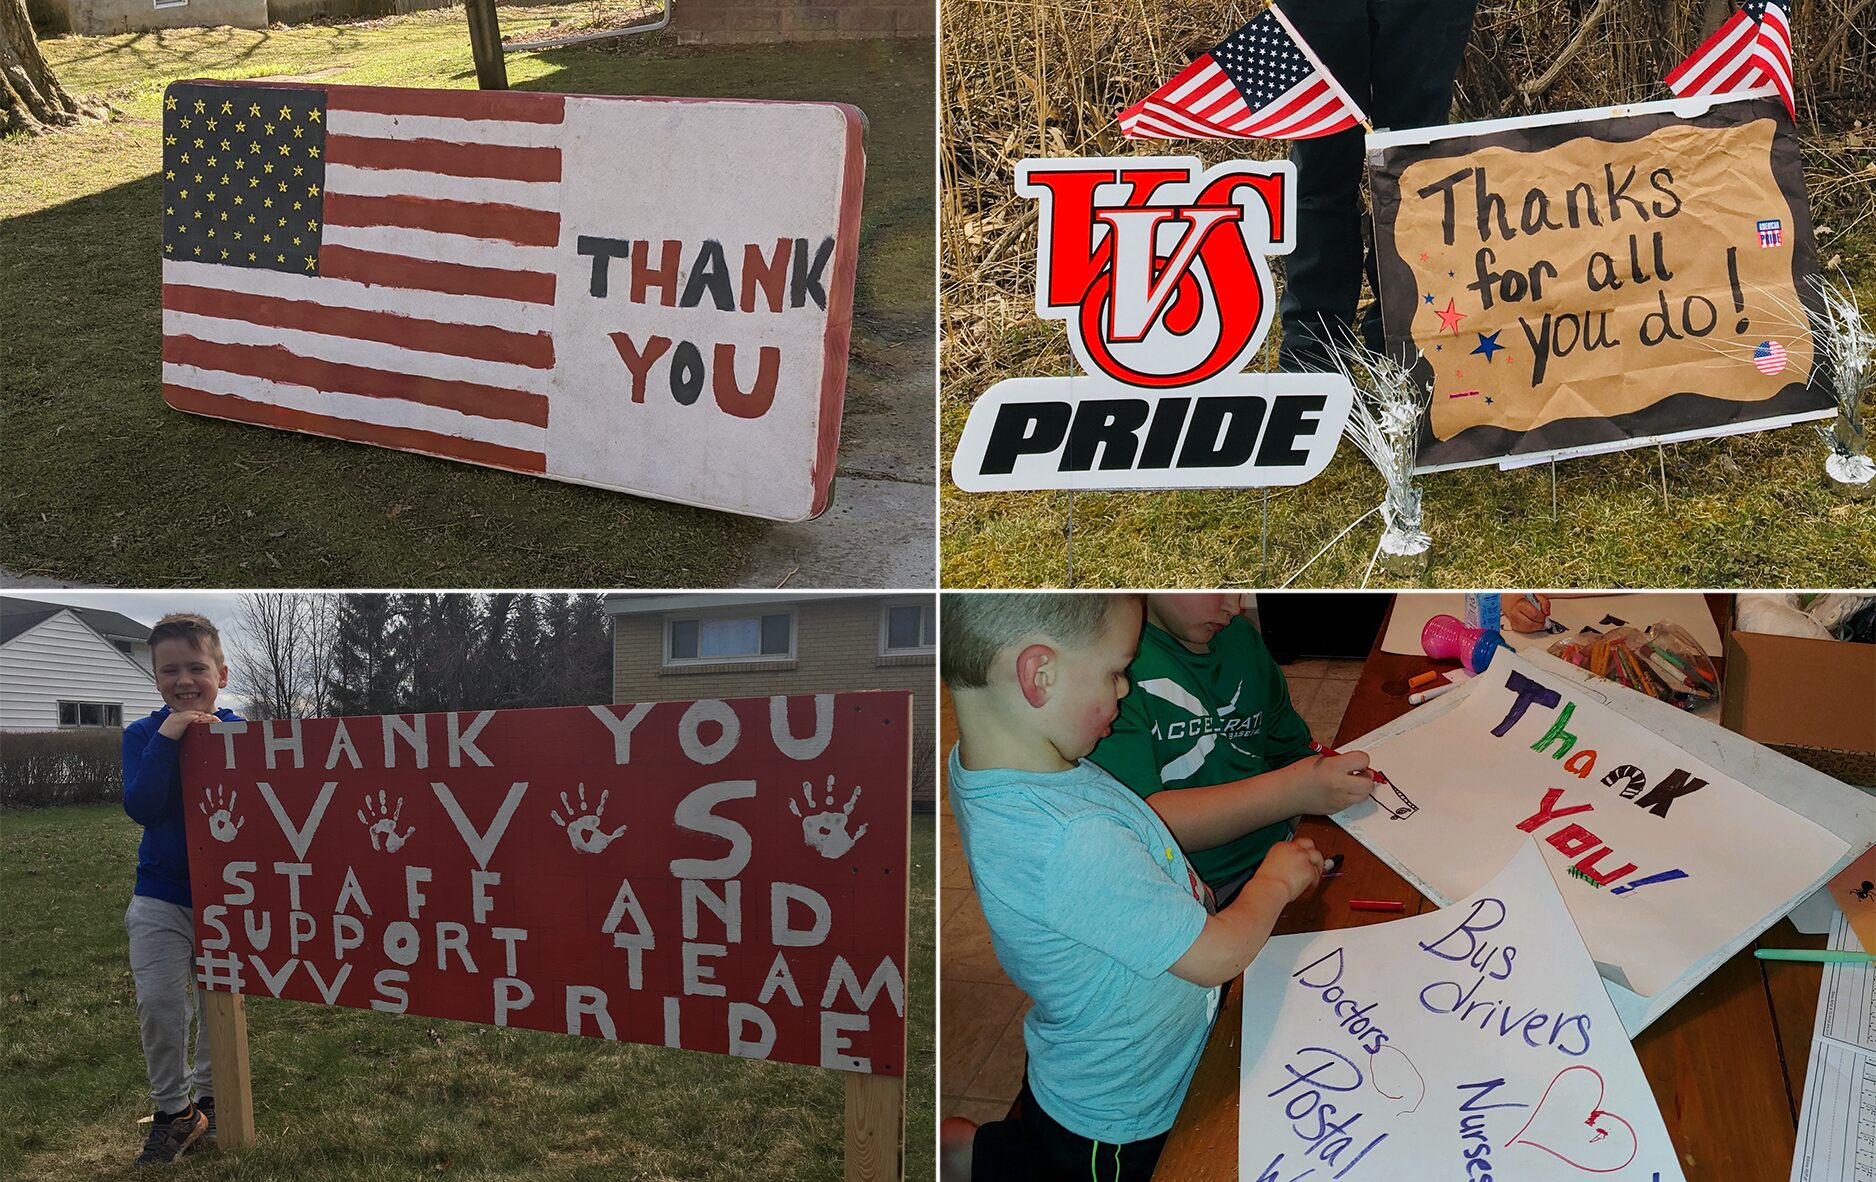 America Together: Uplifting images from across the country